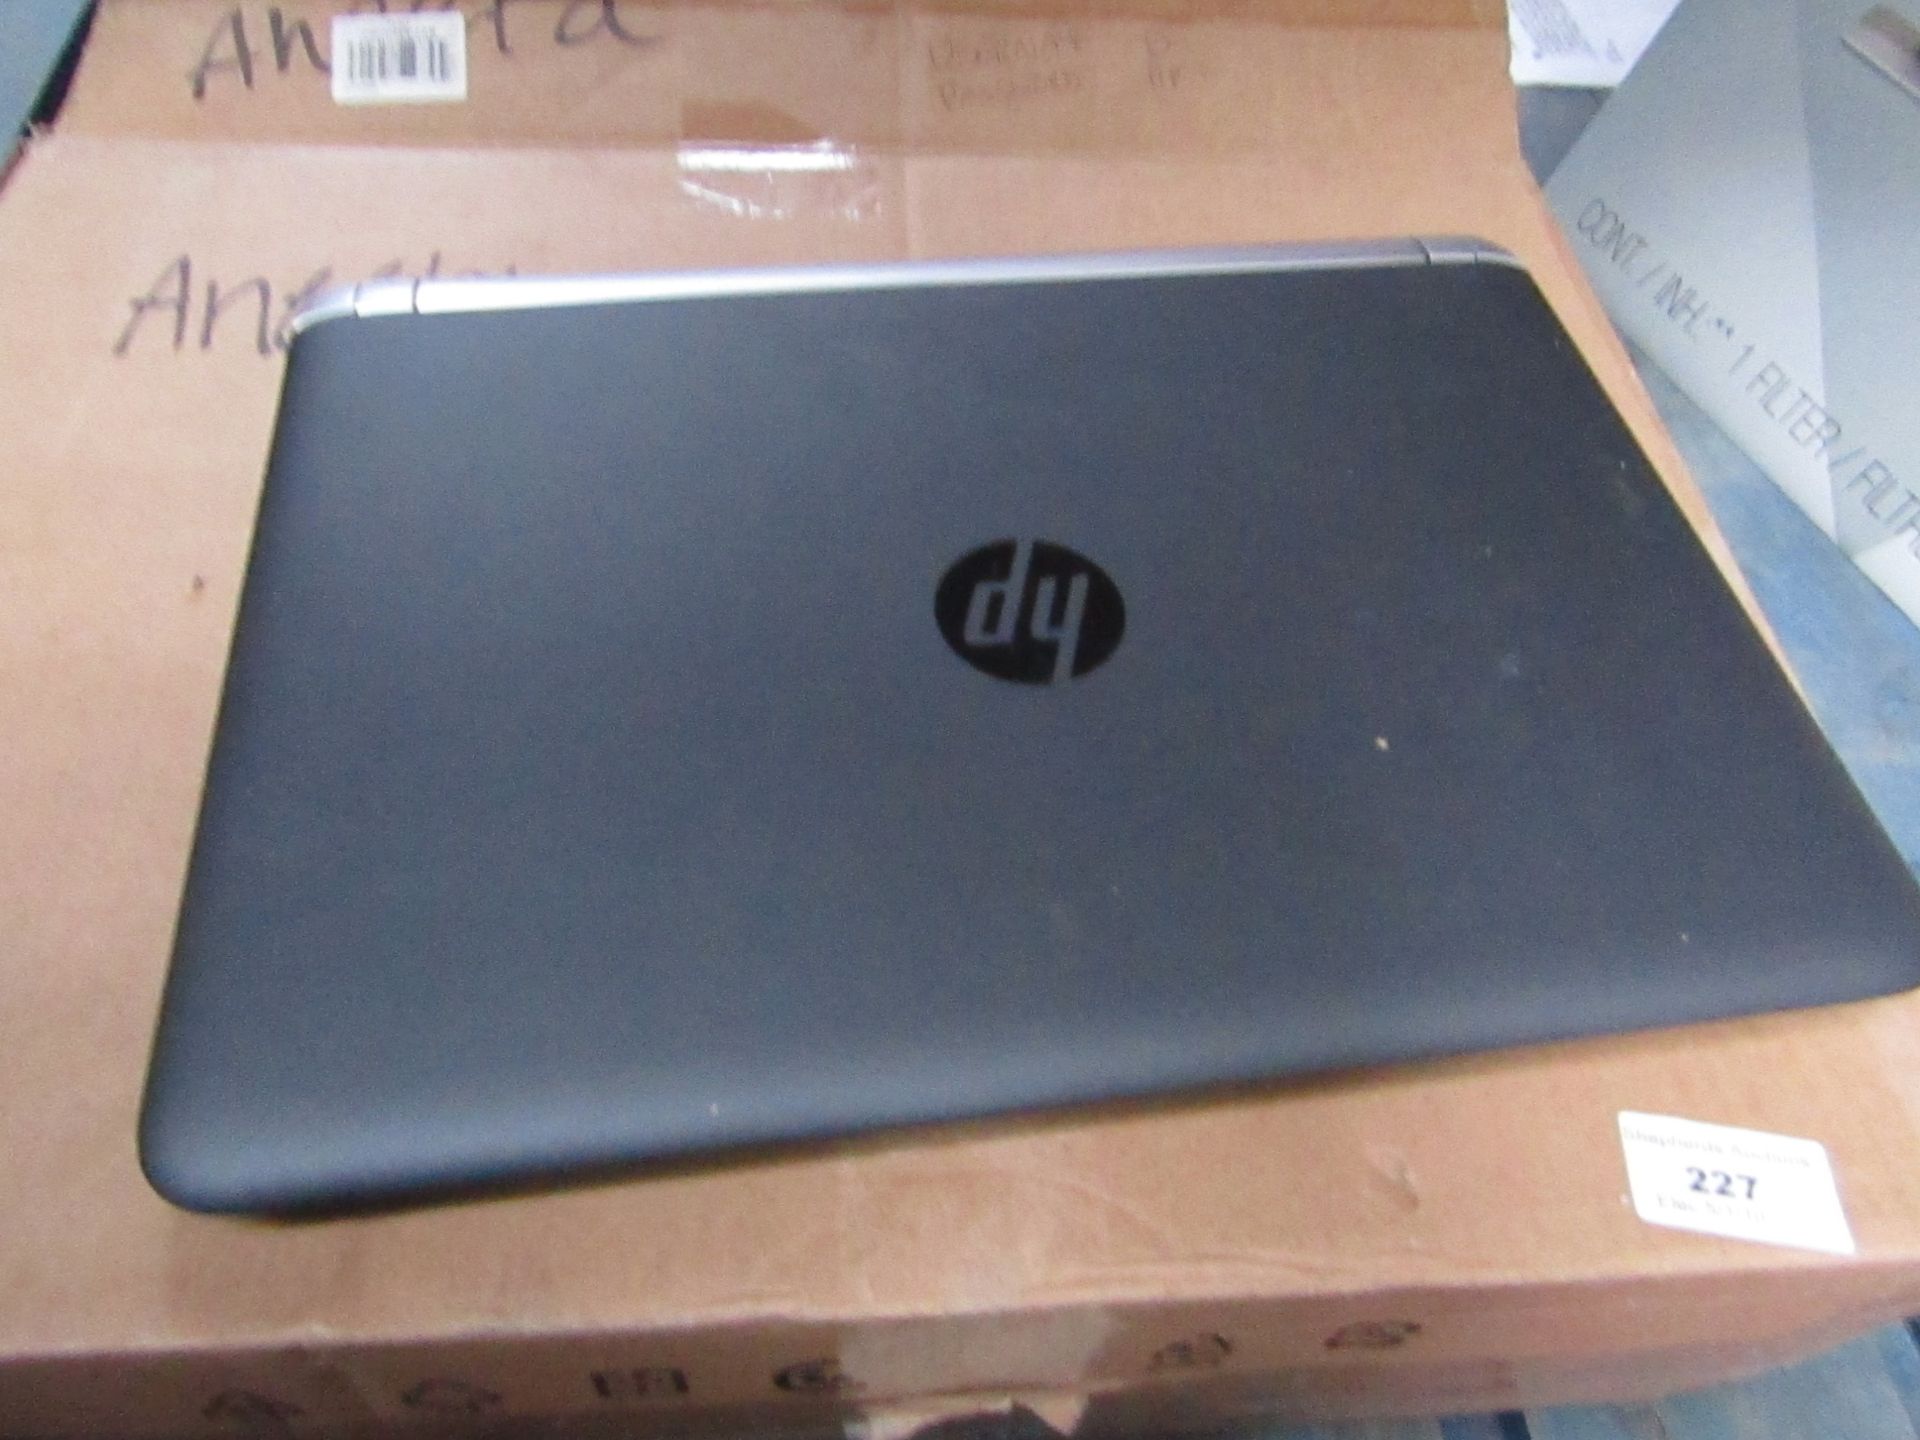 HP Desktop ProDesk computer with keyboard and mouse, no power and boxed.